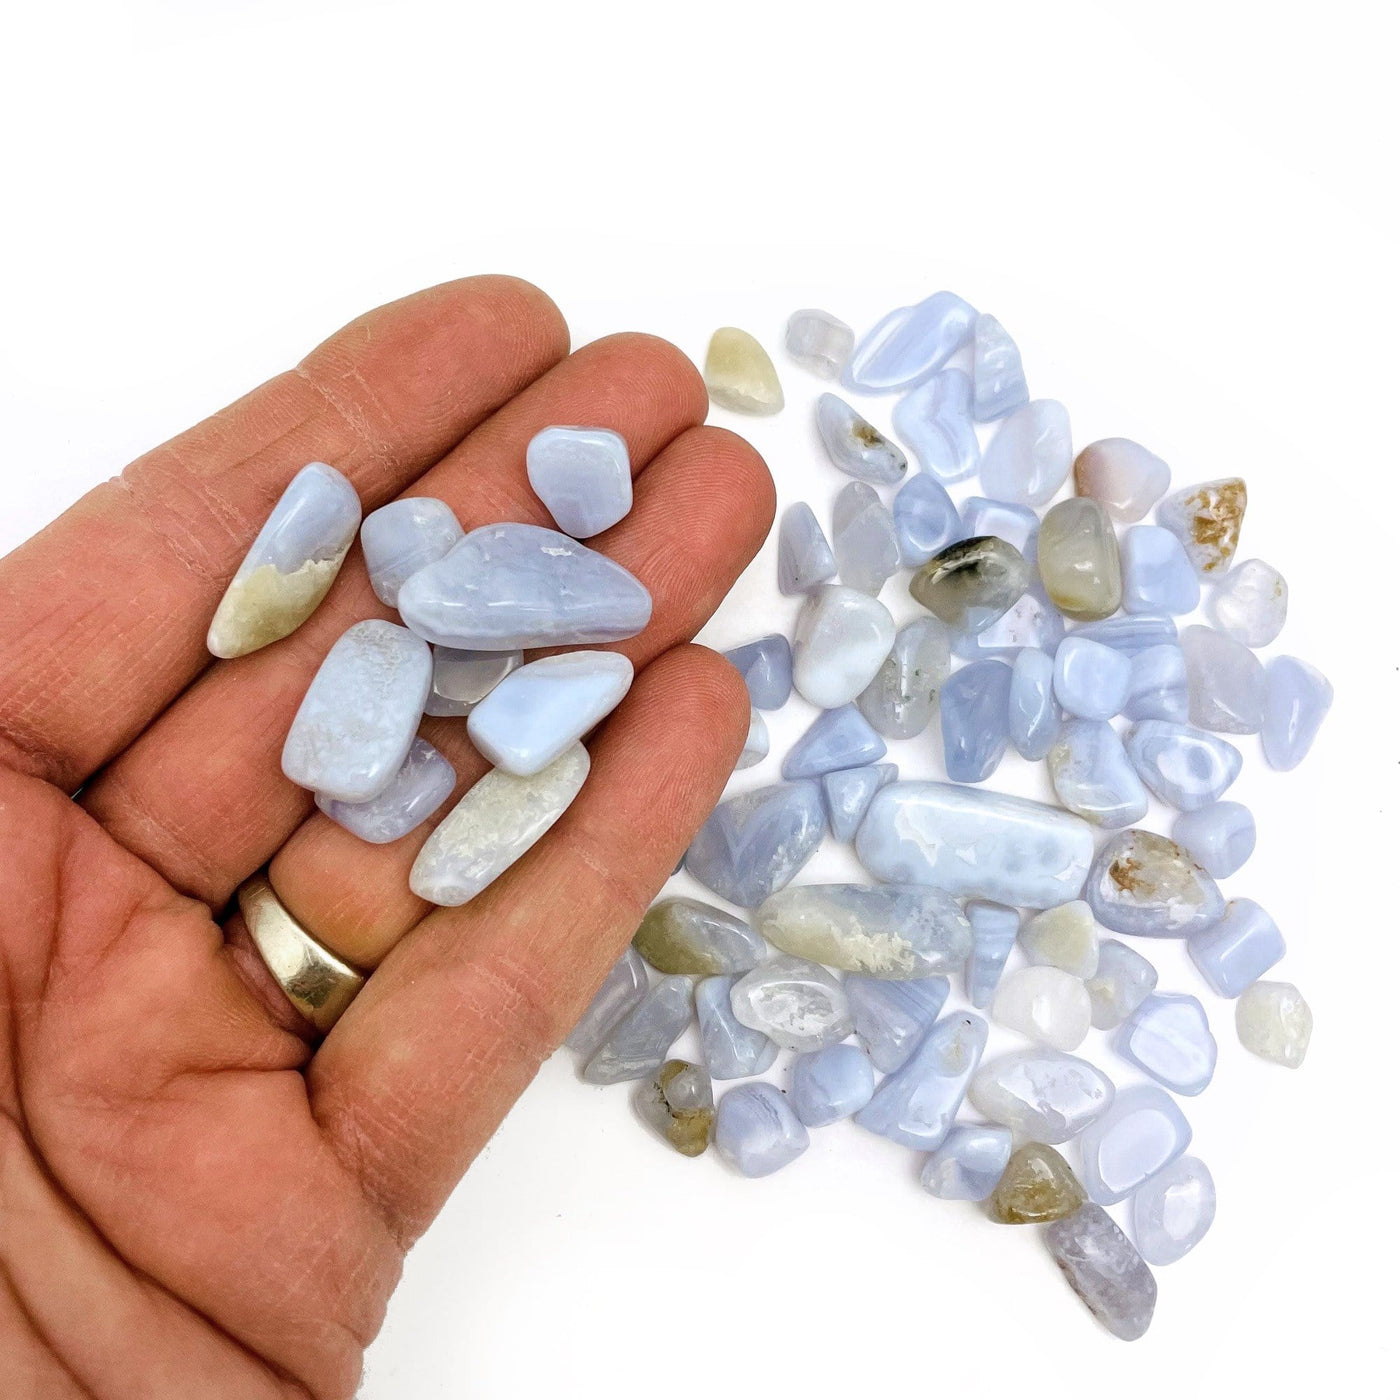 Blue Lace Agate Small Tumbled Stones with some in a hand for size reference